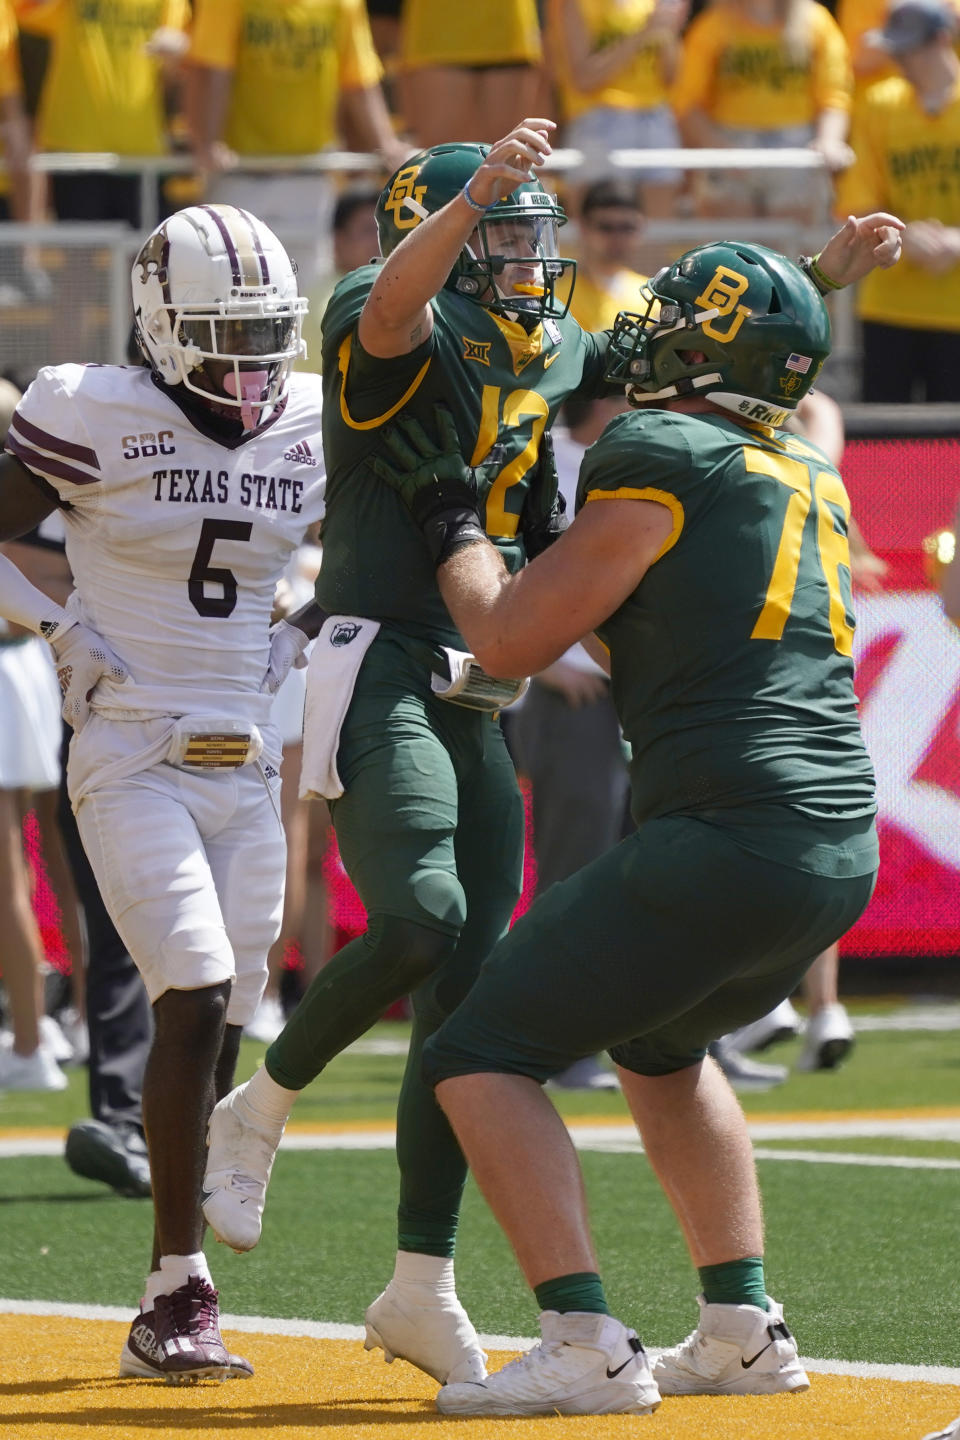 Baylor quarterback Blake Shapen (12) celebrates his touchdown with teammate lineman Connor Galvin (76) as Texas State safety DeJordan Mask (5) looks on during the first half of an NCAA college football game in Waco, Texas, Saturday, Sept. 17, 2022. (AP Photo/LM Otero)